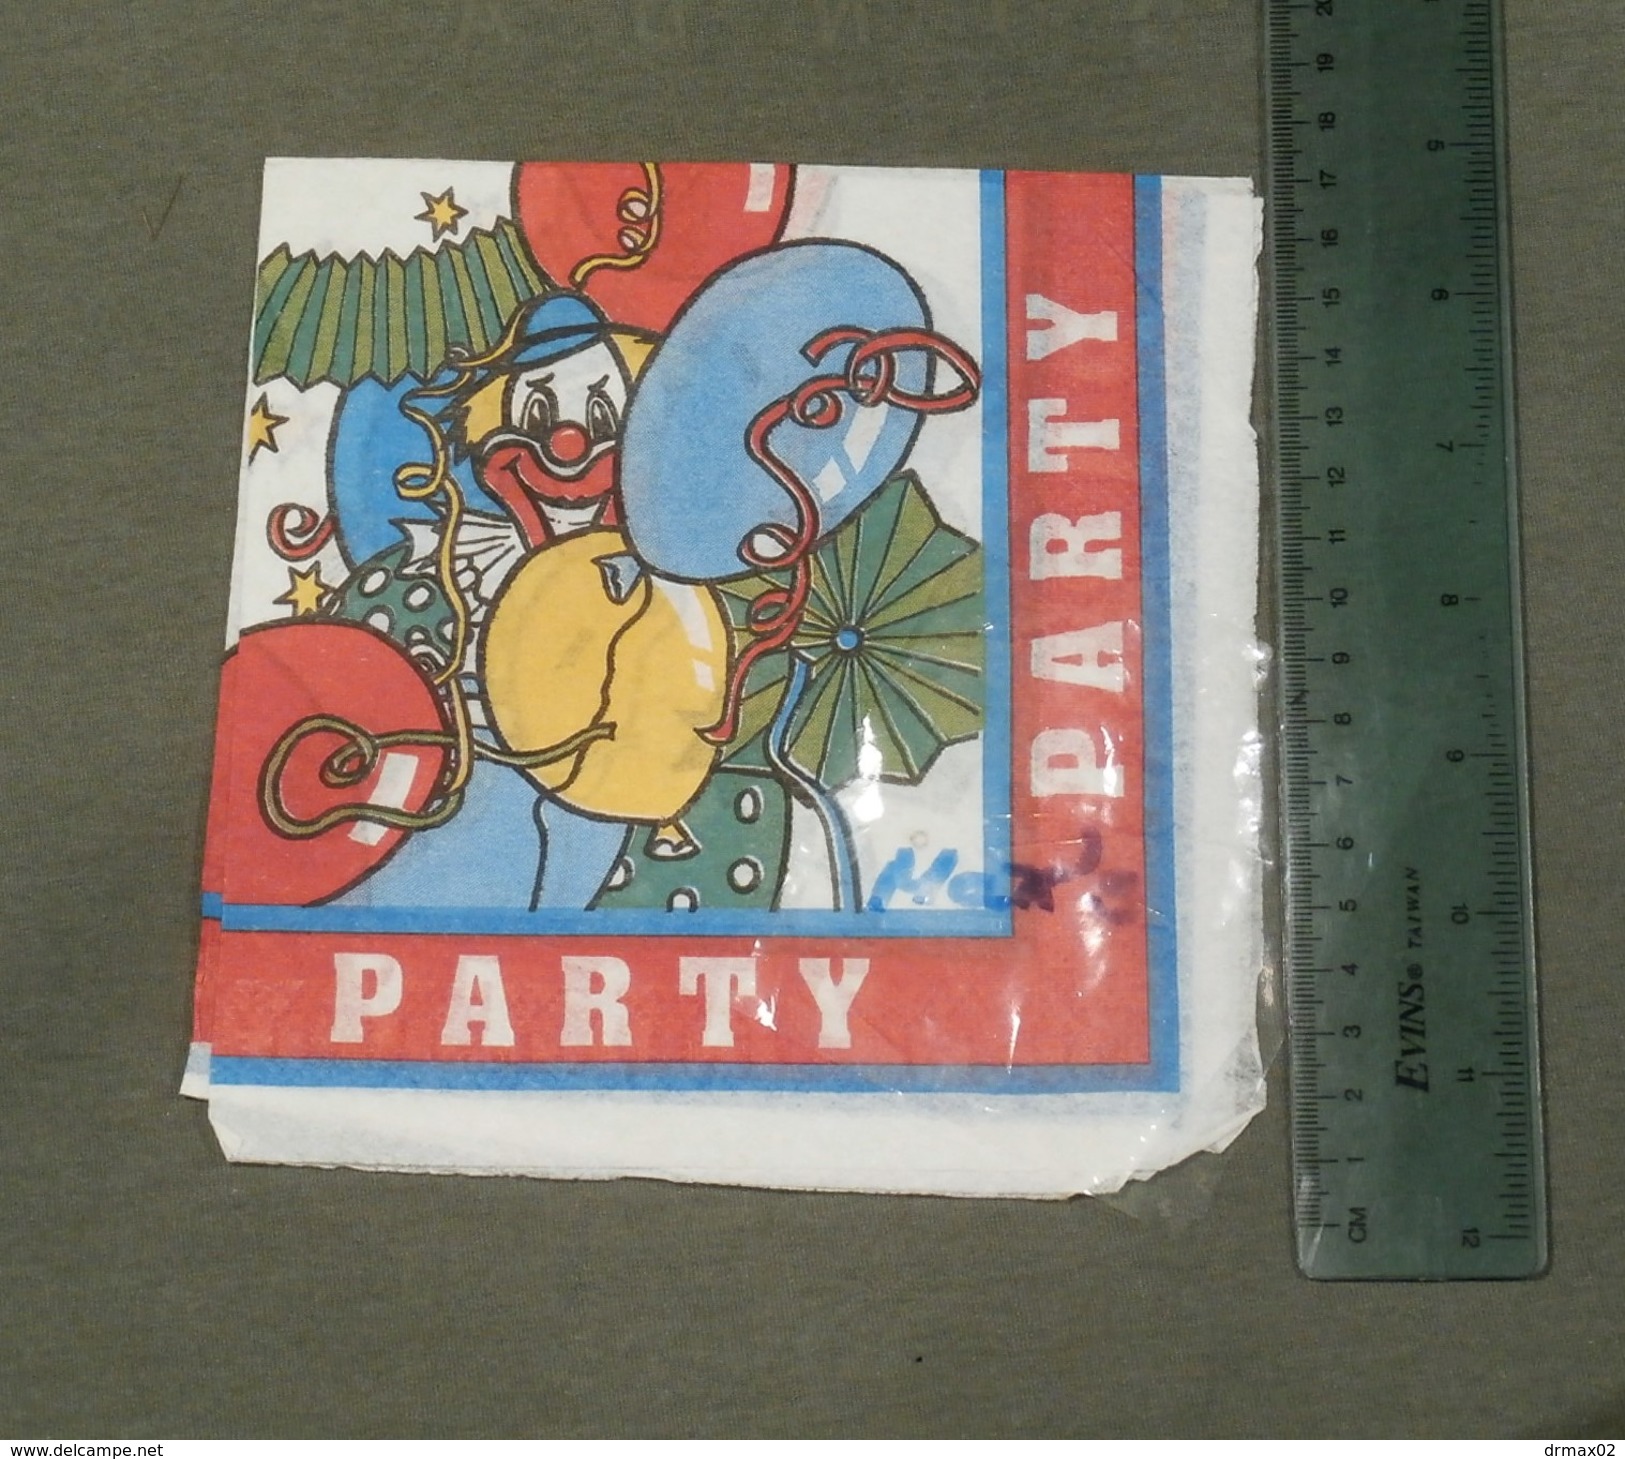 Clown Circus, Balloons ... PARTY - Paper Napkins (decorated)